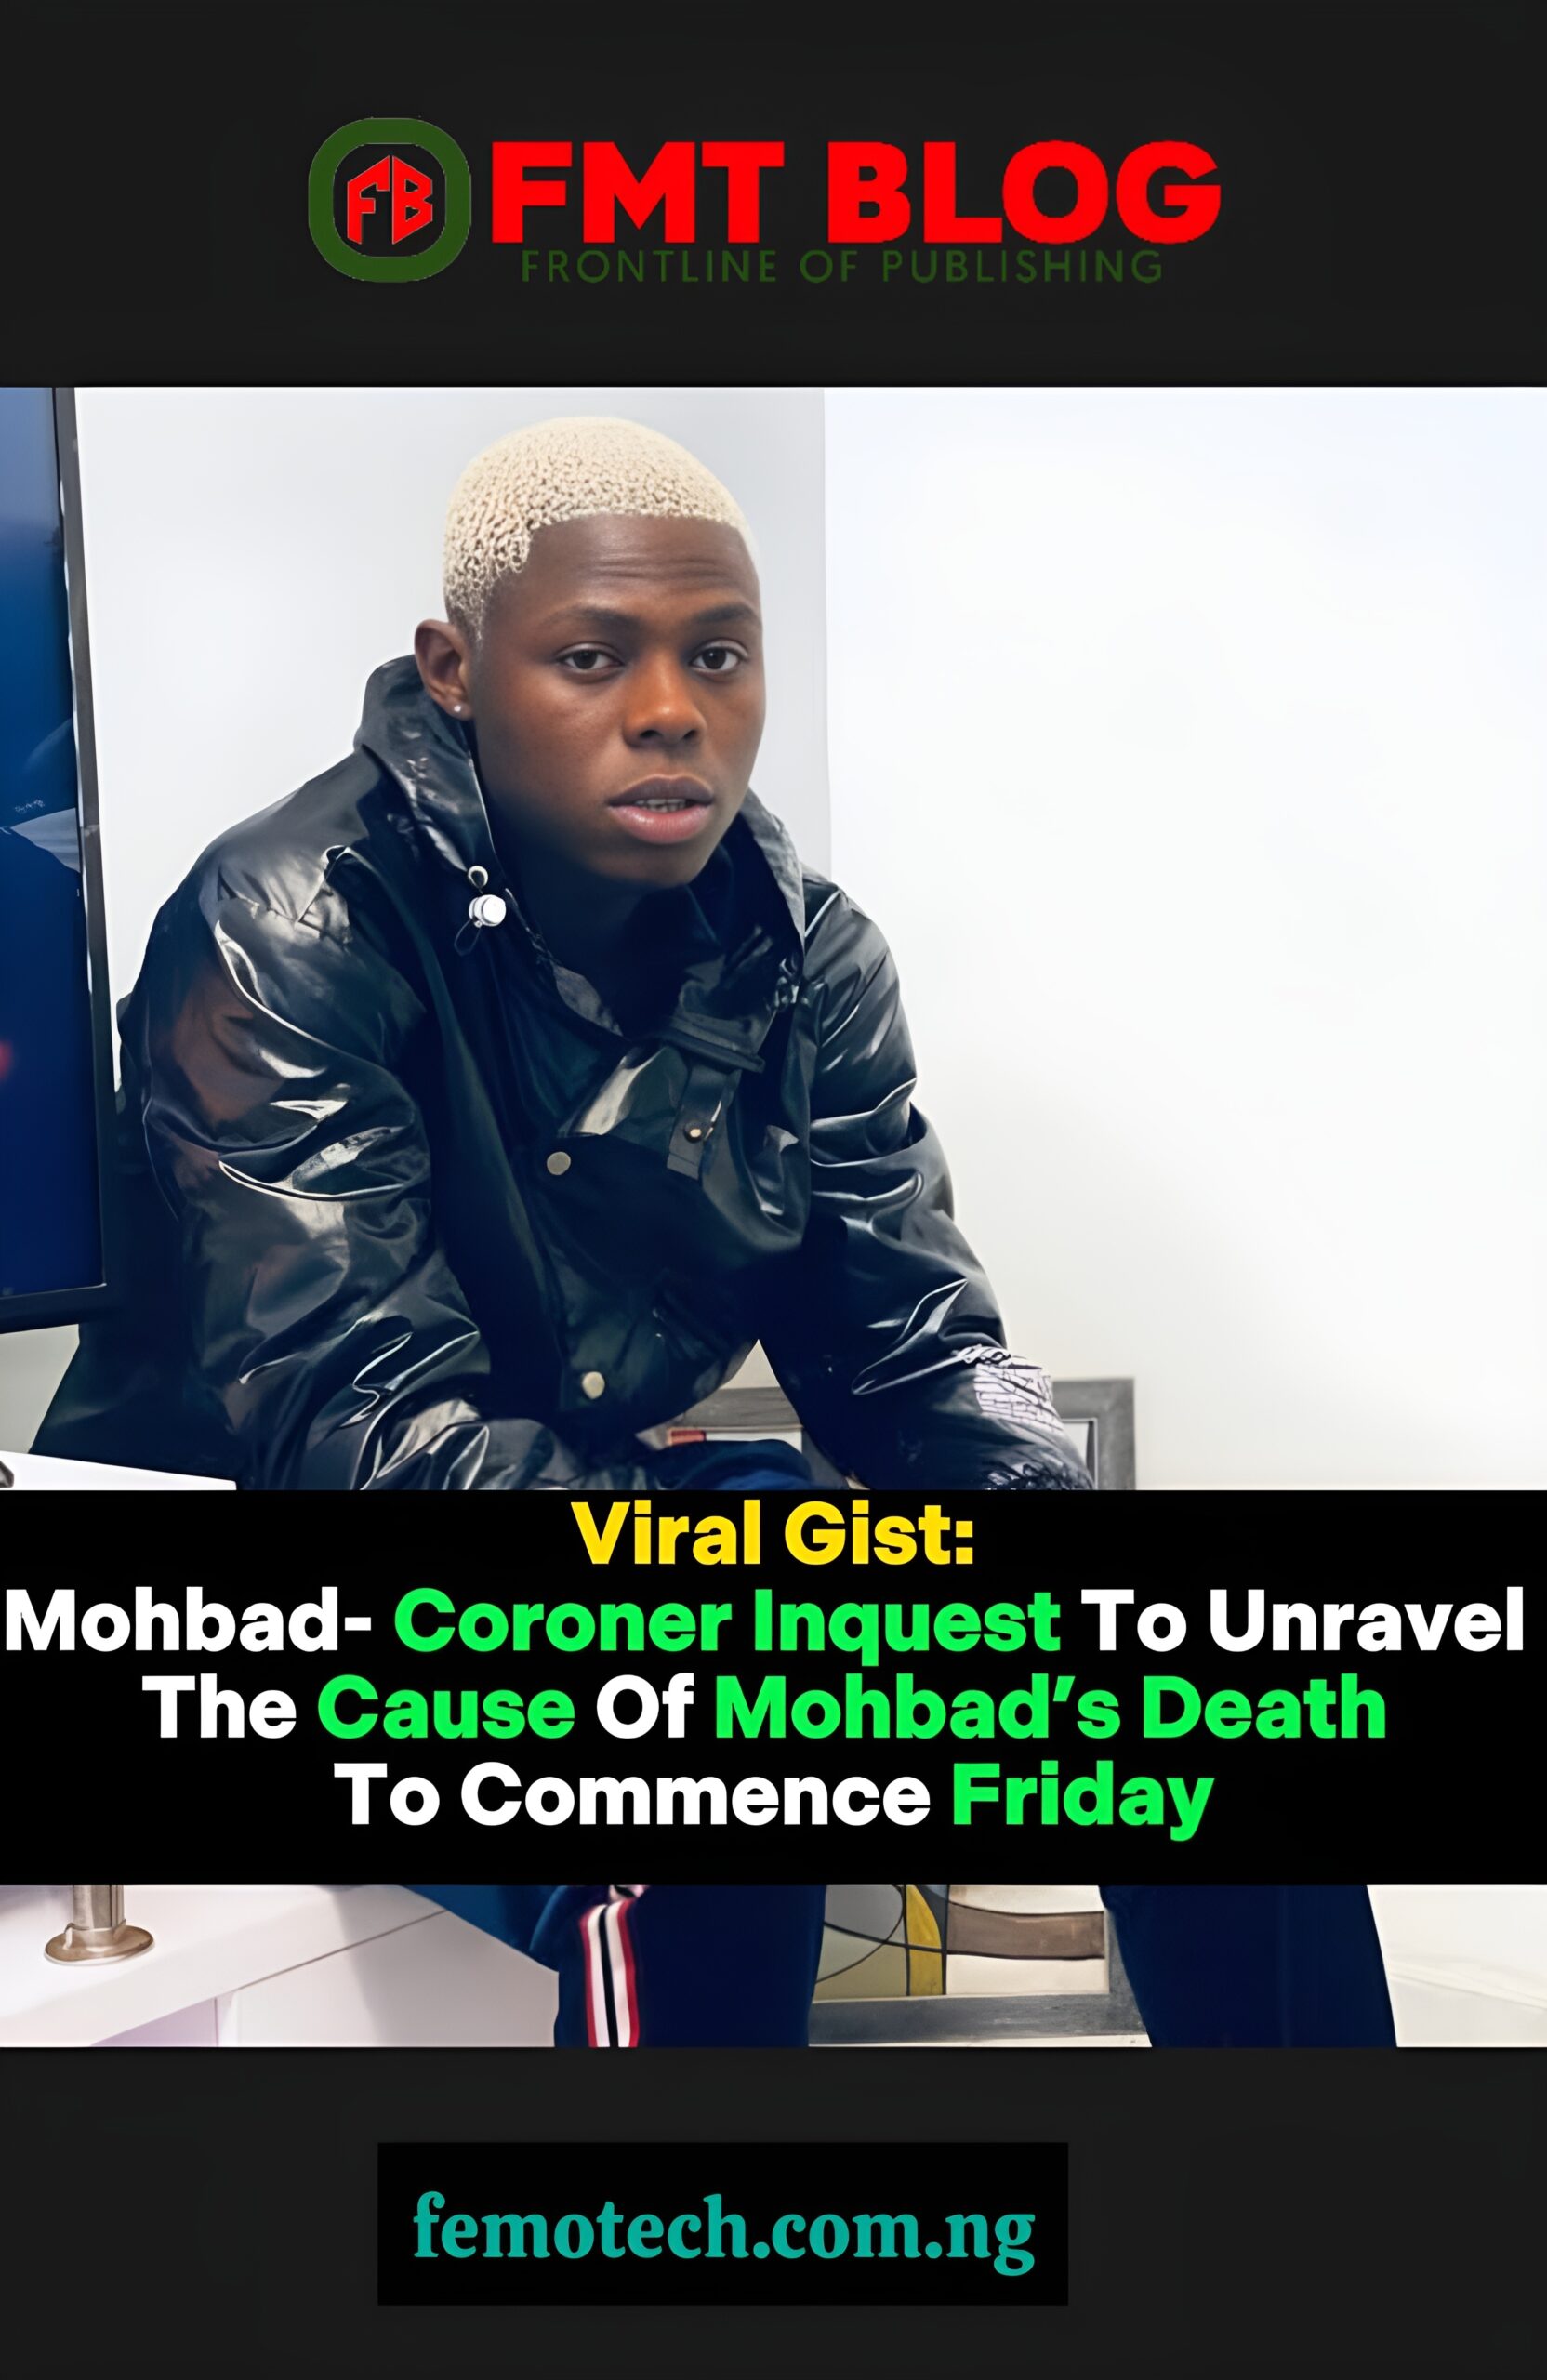 Mohbad- Coroner Inquest To Unravel The Cause Of Mohbad’s Death To Commence Friday